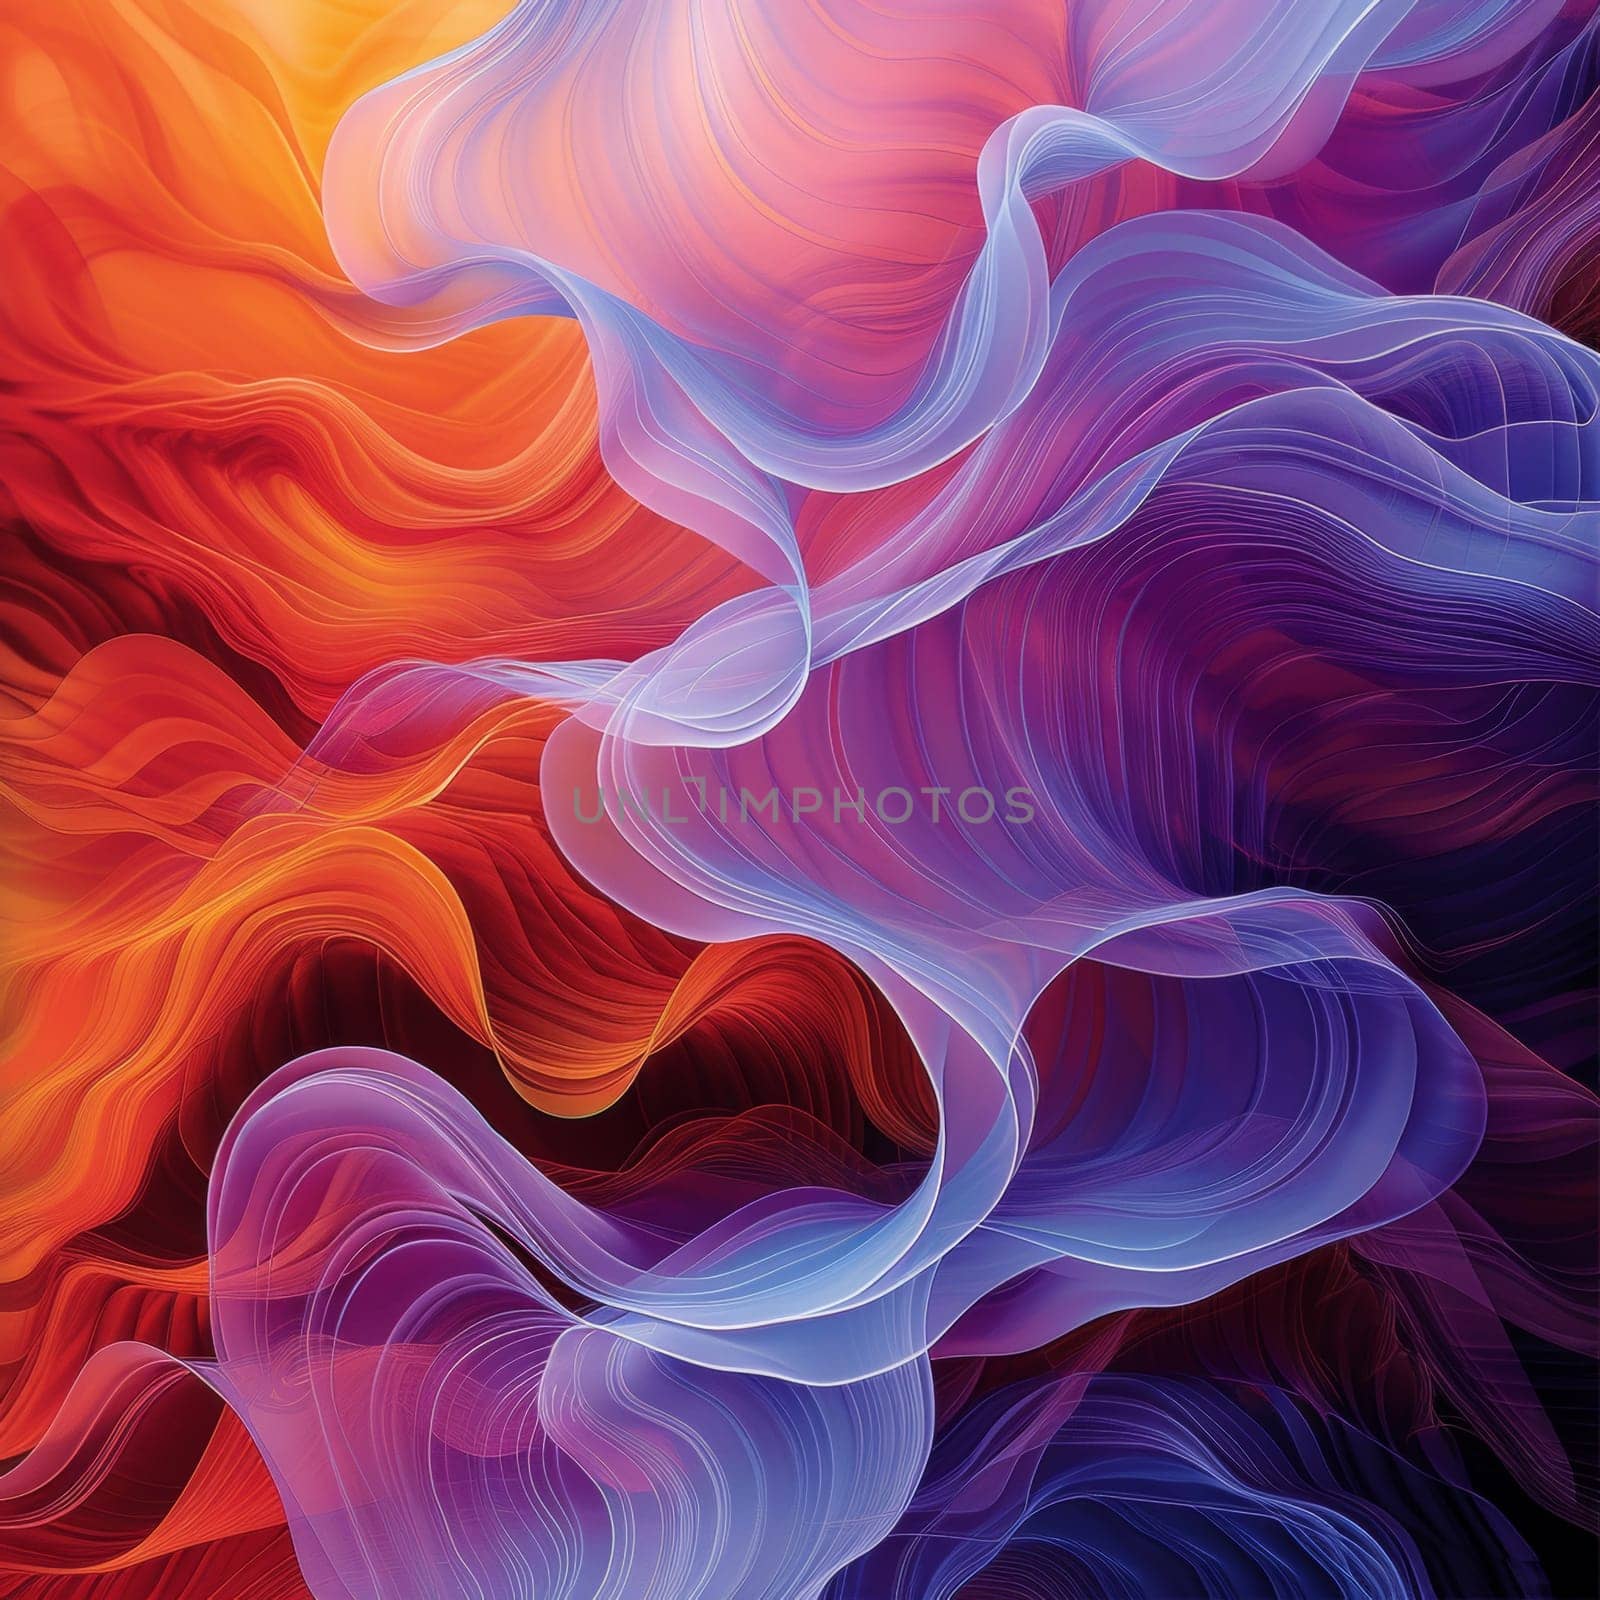 A close up of a colorful abstract painting with waves